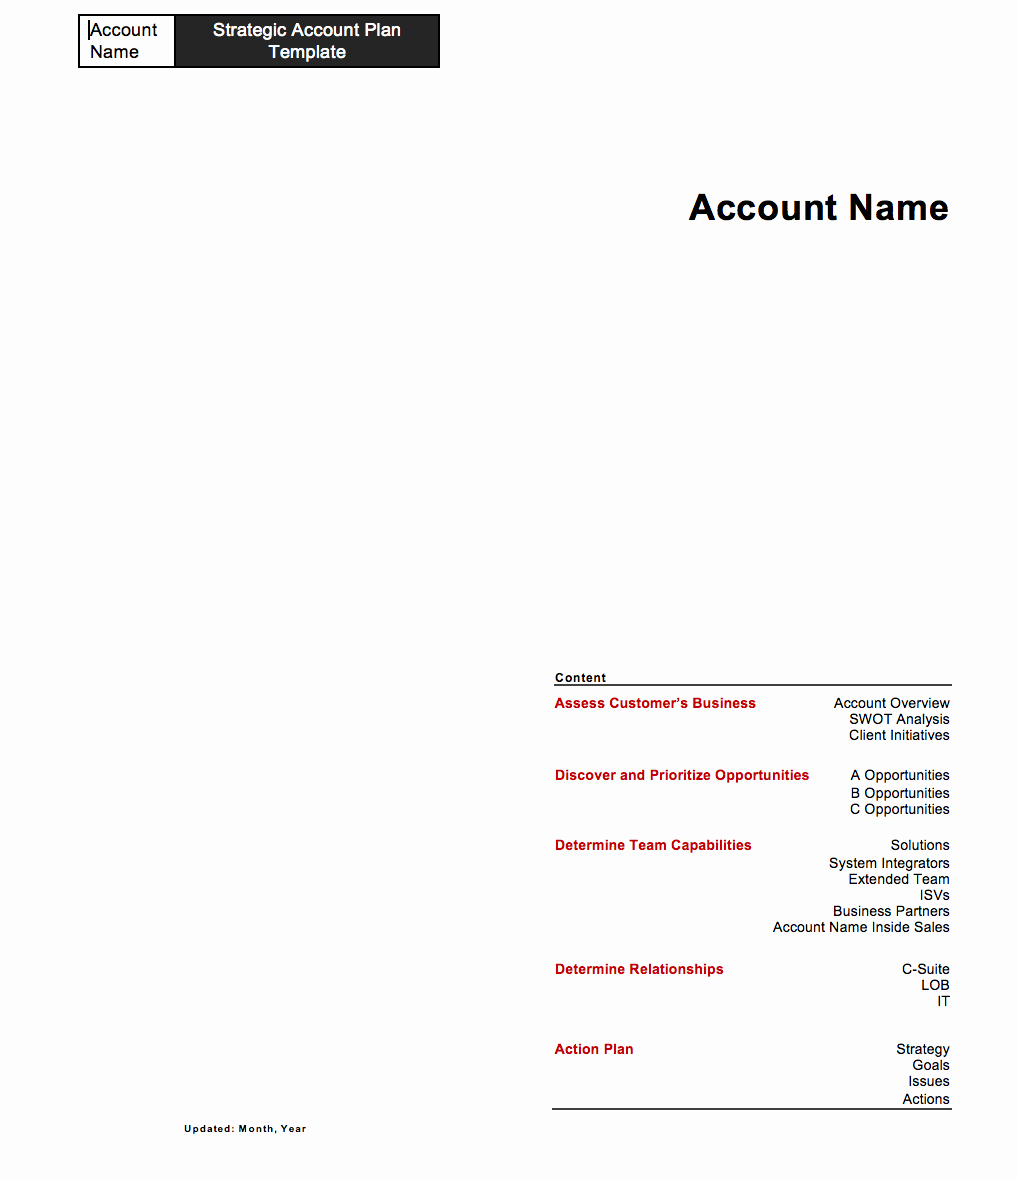 Strategic Account Plan Template Lovely Strategic Account Plan Template for B2b Sales Released by